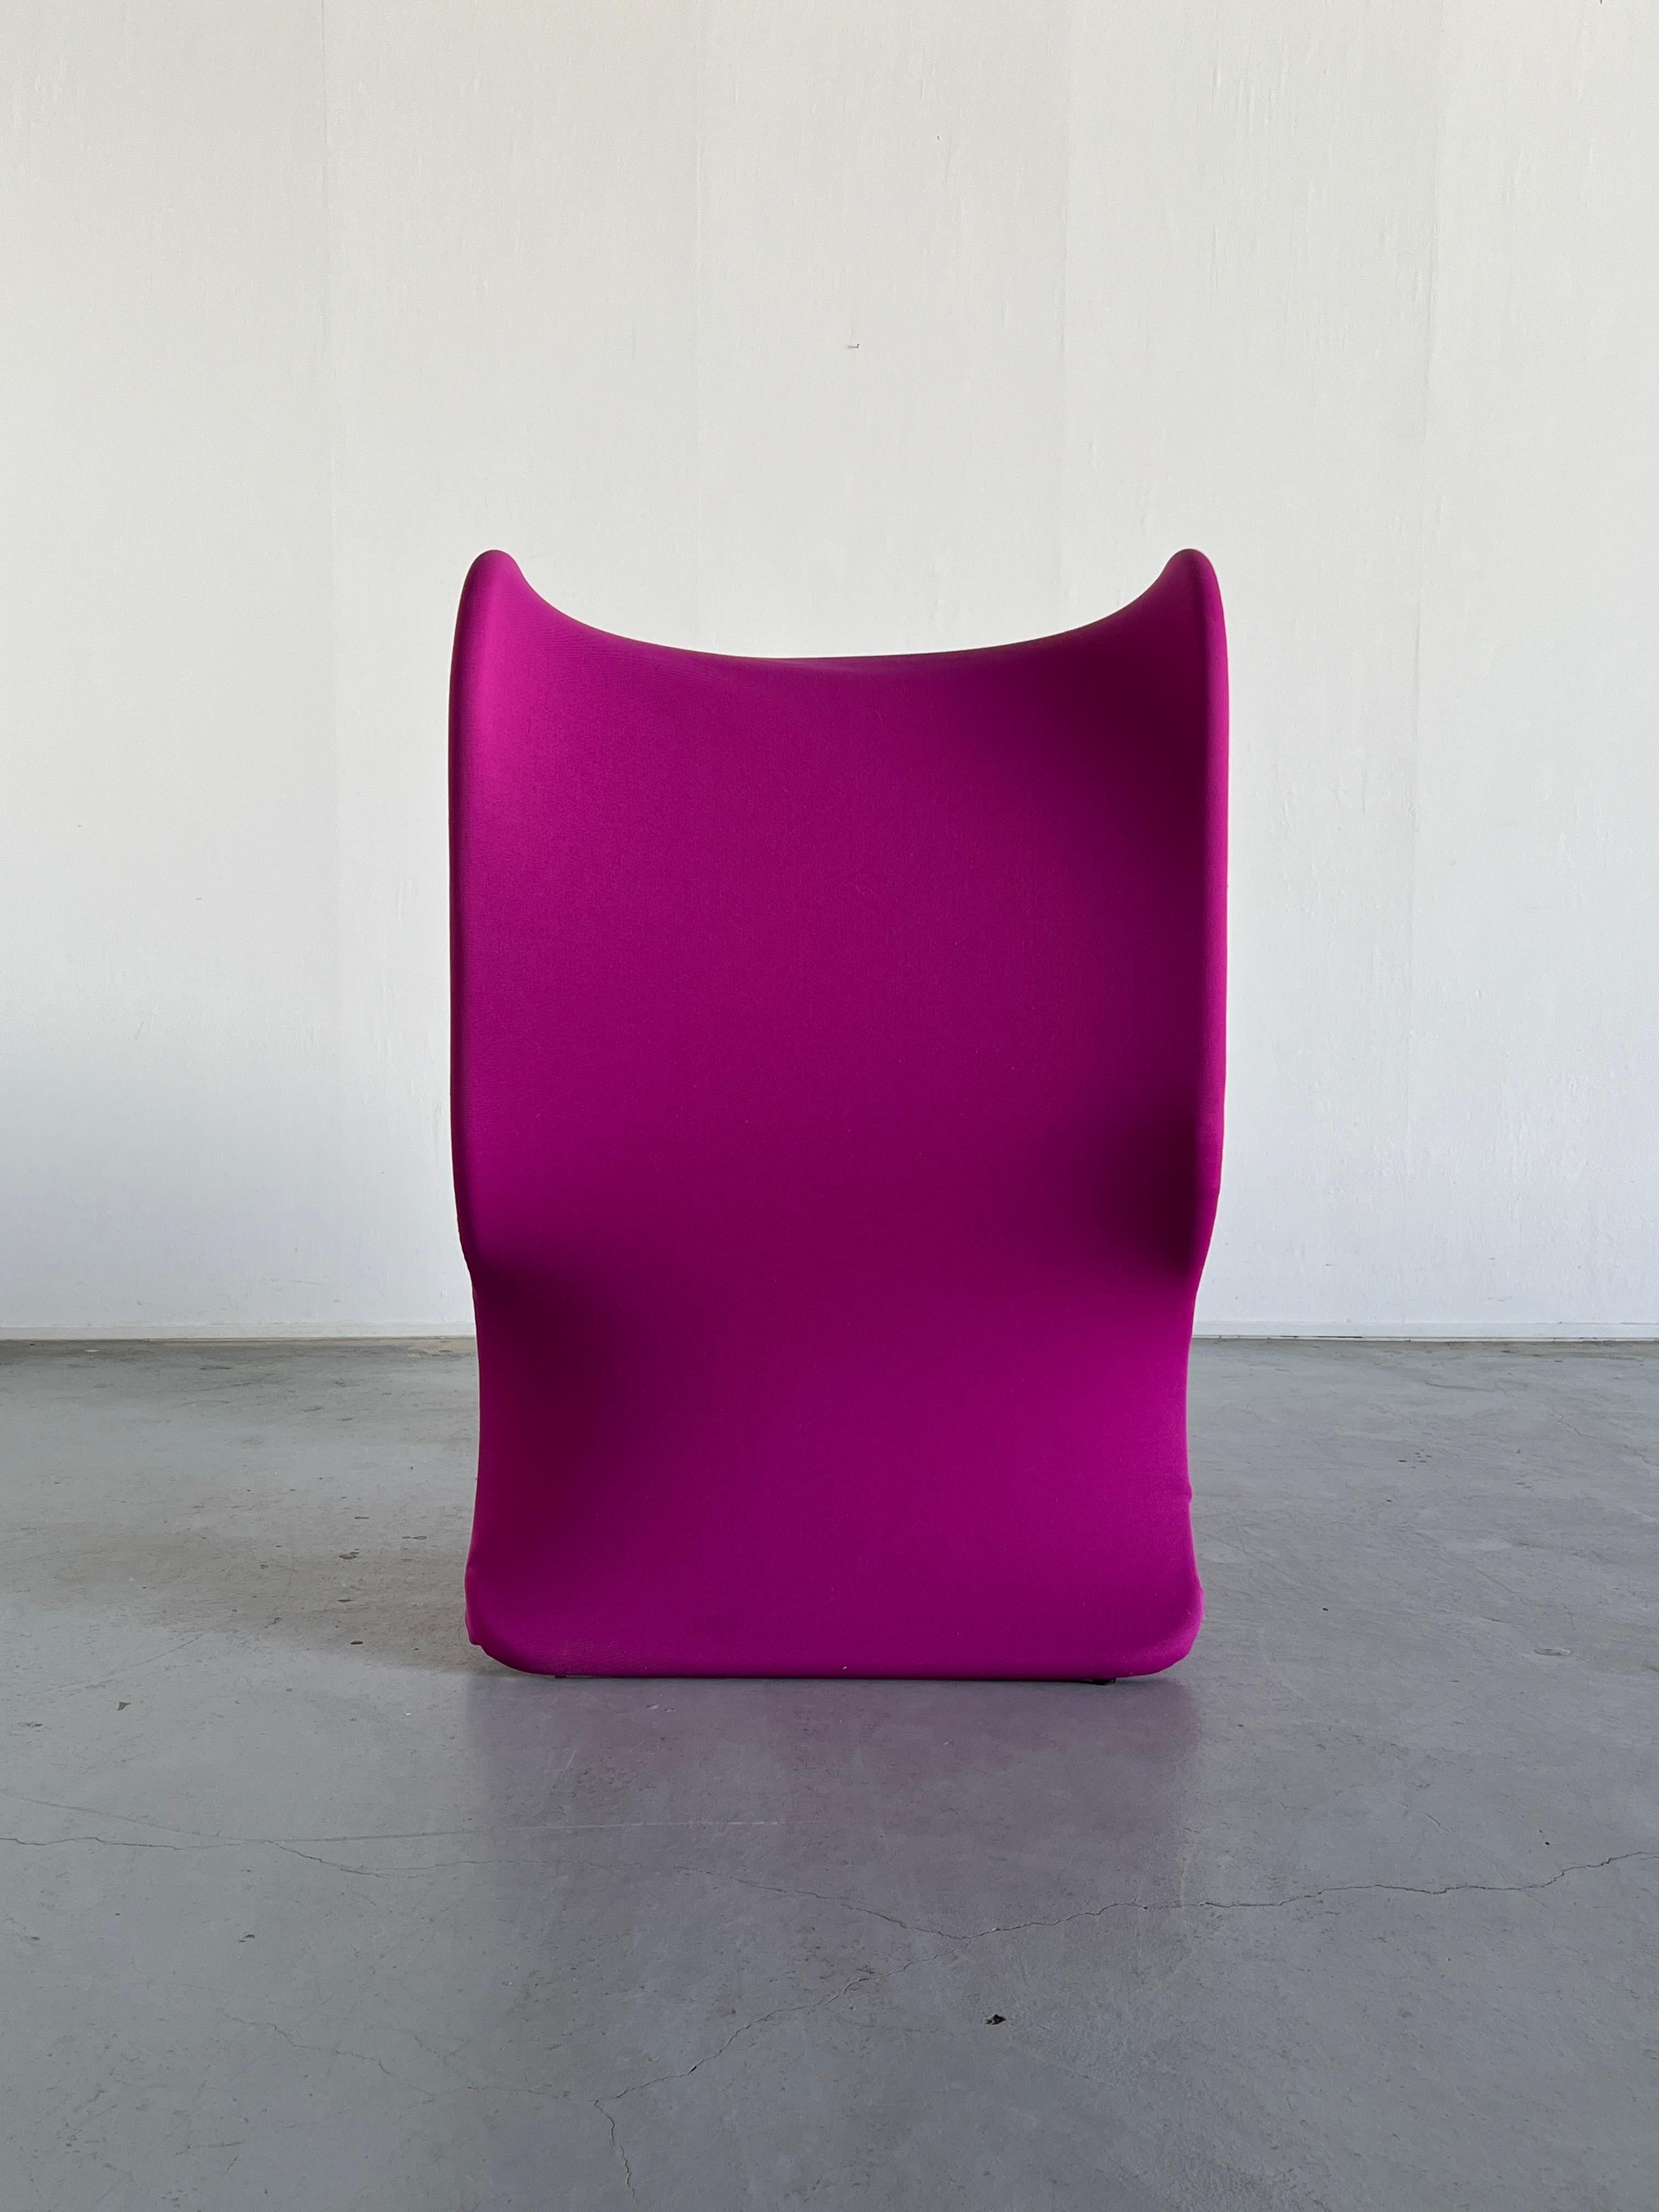 Metal Large Fiocco Armchair by Gianni Pareschi for Busnelli in Pink, 1970s For Sale